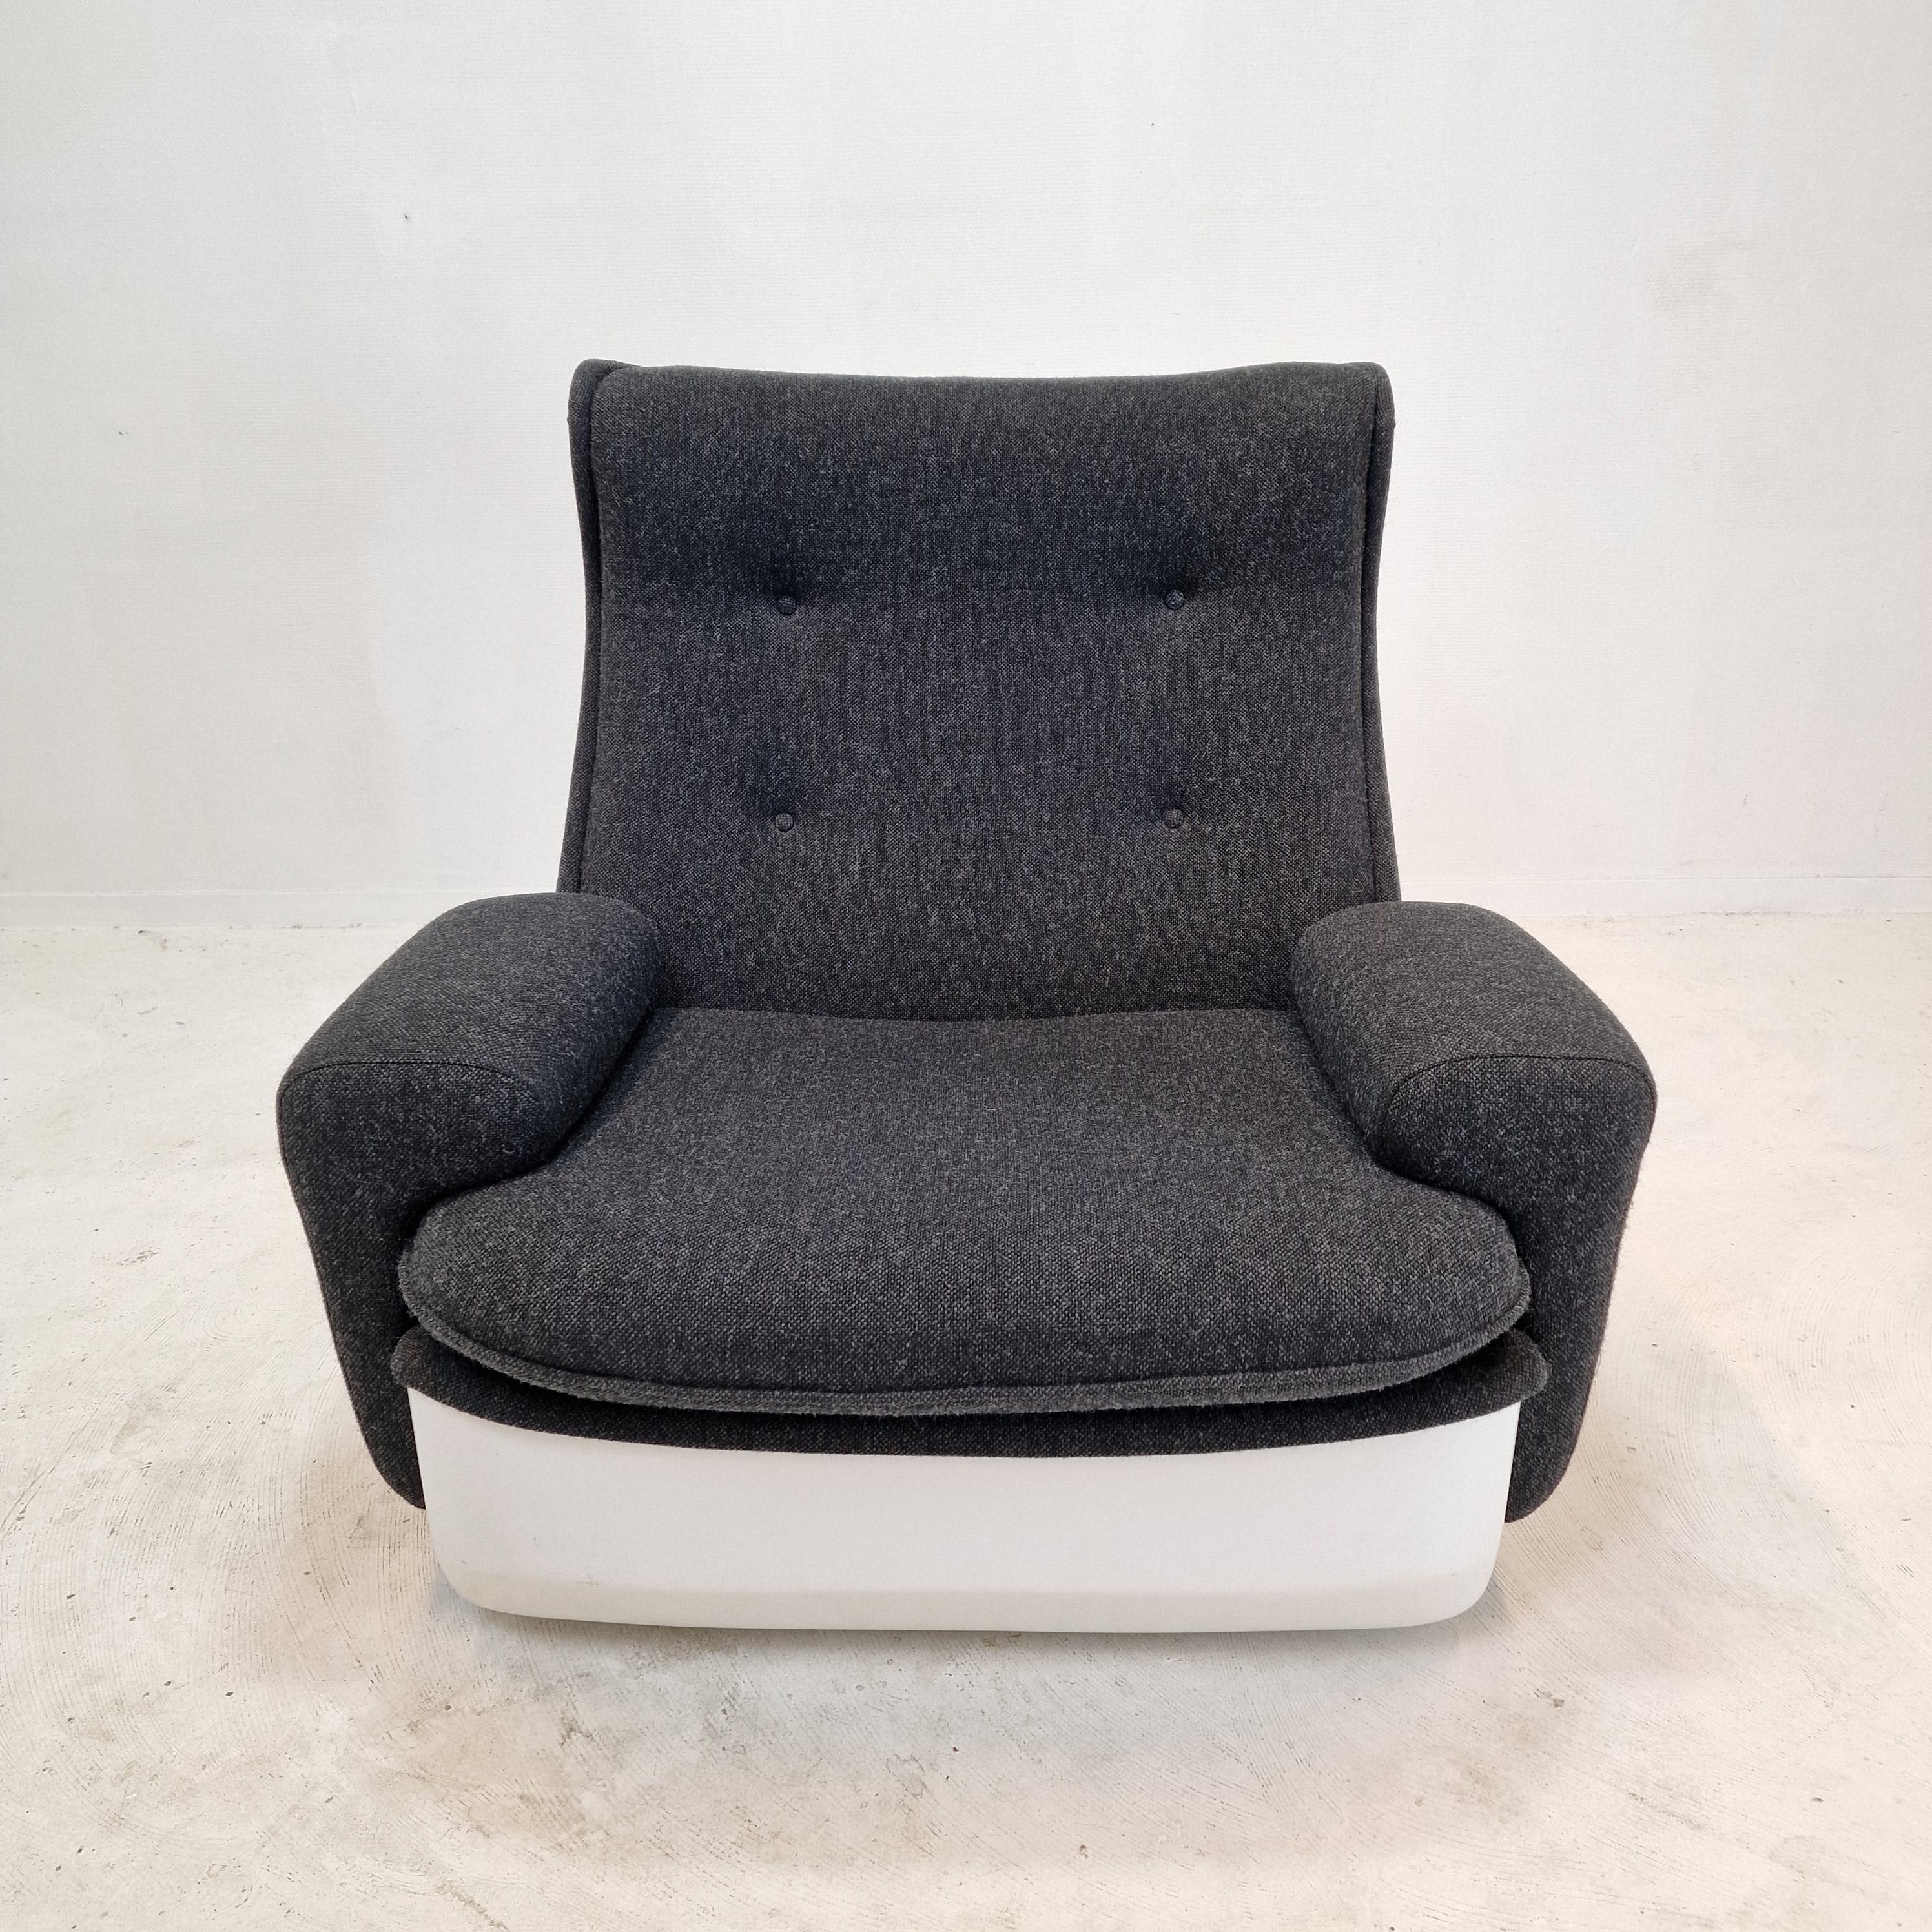 Molded “Orchidée” Lounge Chair by Michel Cadestin for Airborne, France, 1968 For Sale